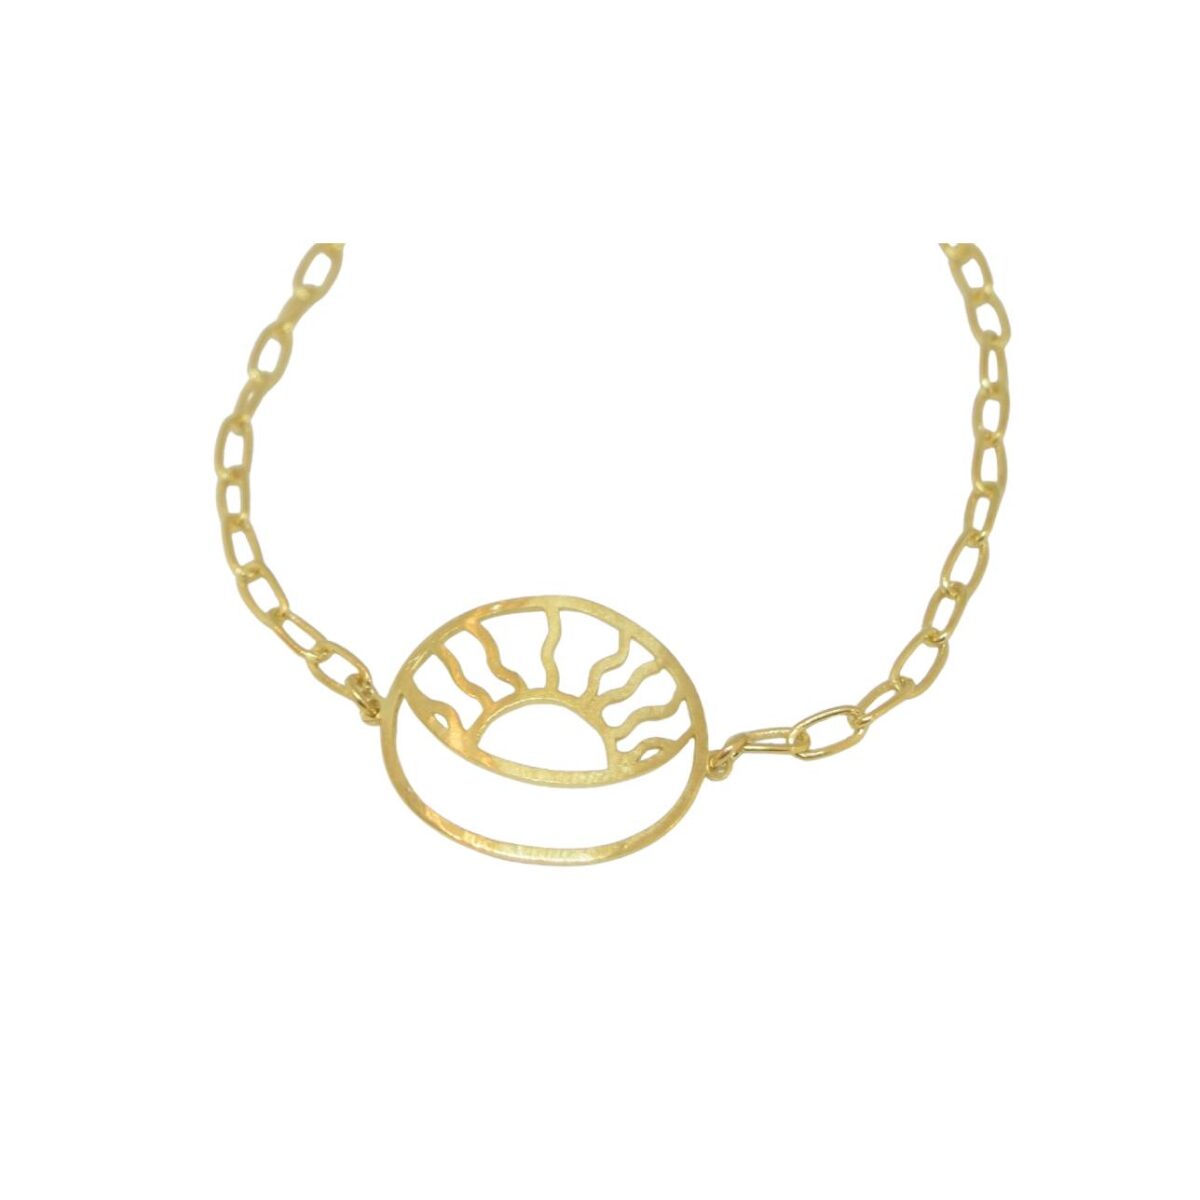 The Eclipse Love Story II gold plated bracelet